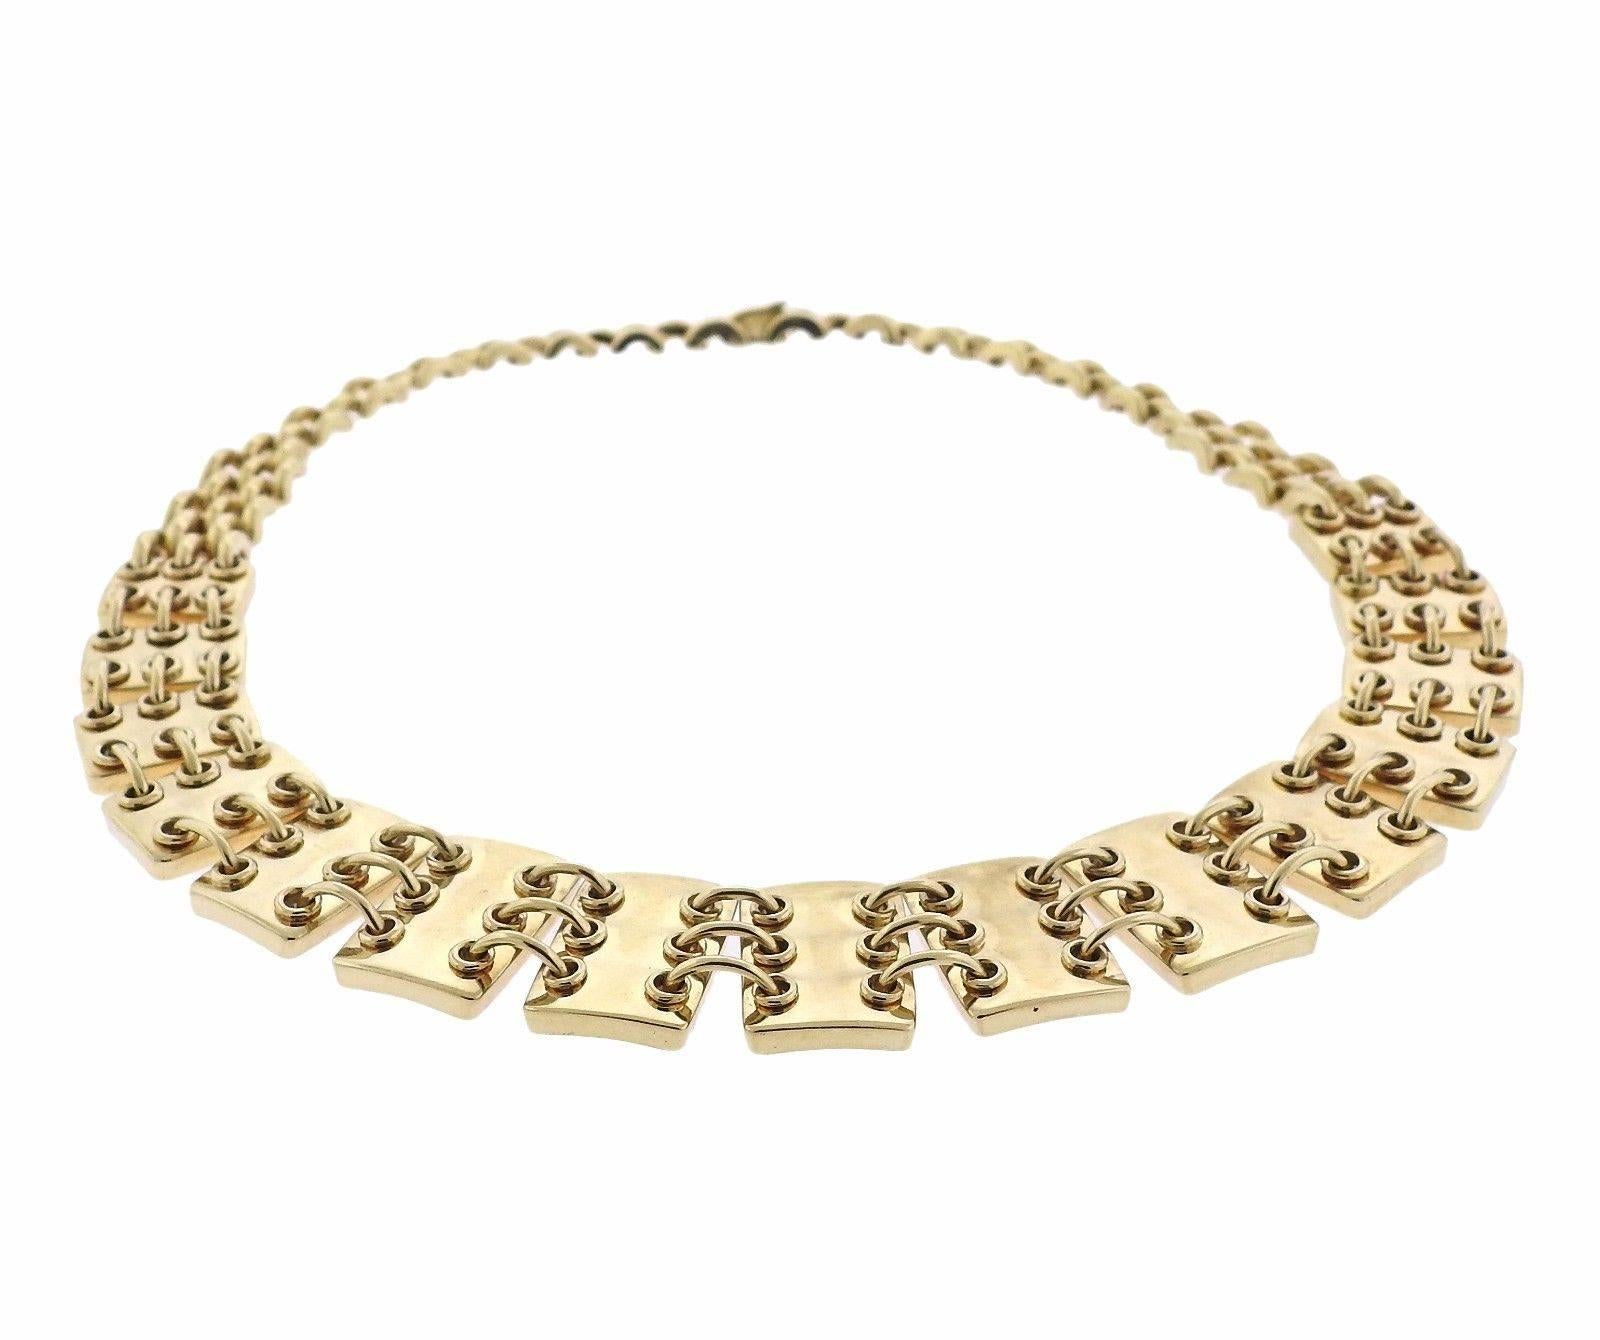 A 14k yellow gold necklace by Jose Hess.  The necklace is 14 3/4" long and 19mm wide.  The weight of the necklace is 84.3 grams.  Marked: 111682, Jose Hess, 14k.